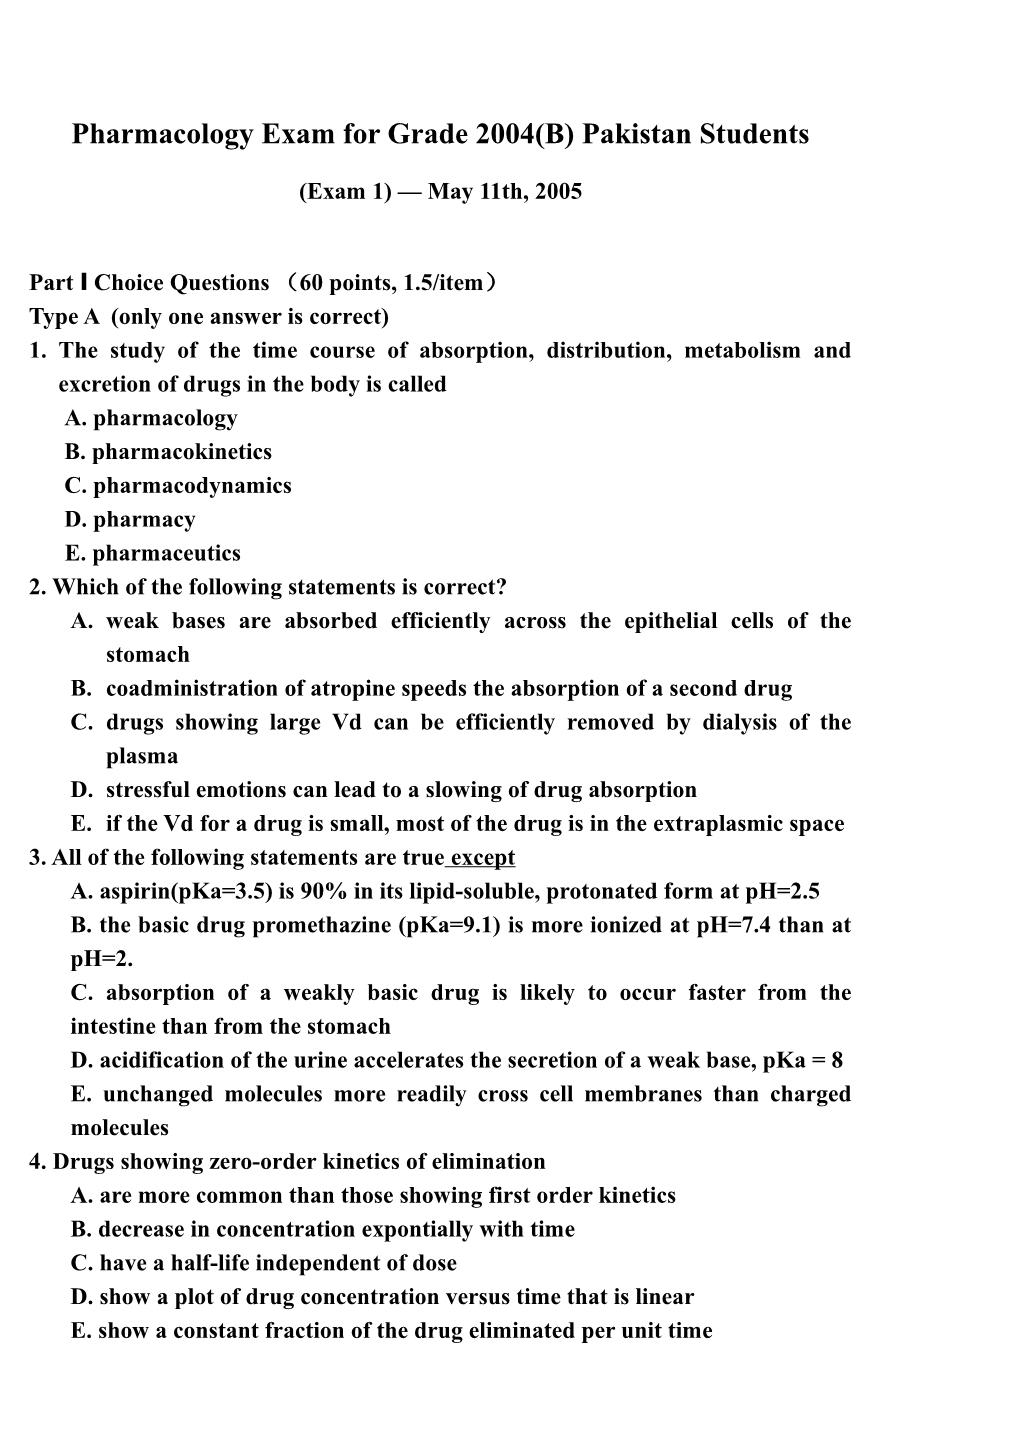 Pharmacology Exams for Grade 2002 Pakistan Students (2)